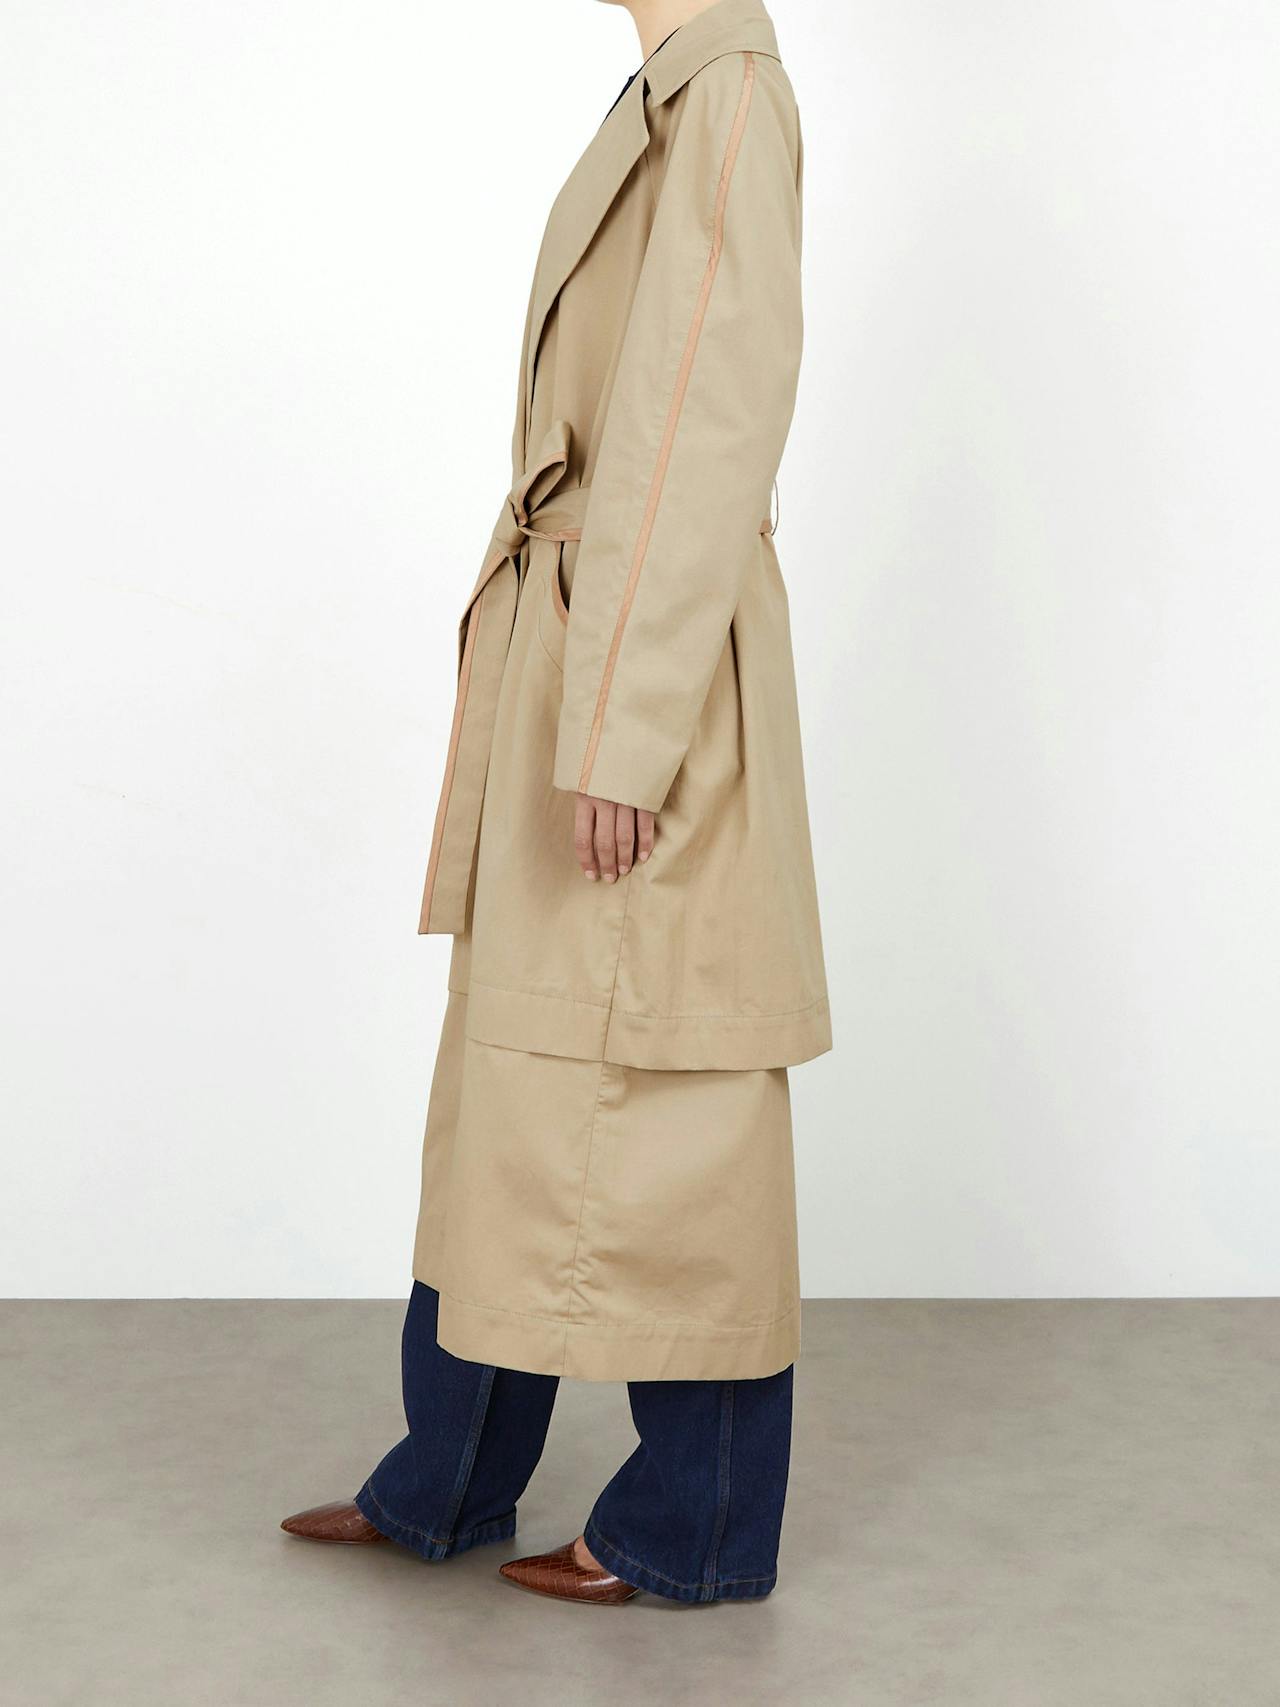 This Issue Twelve double-breasted, oversized fit coat is the perfect classic trench for any outfit. Collagerie.com